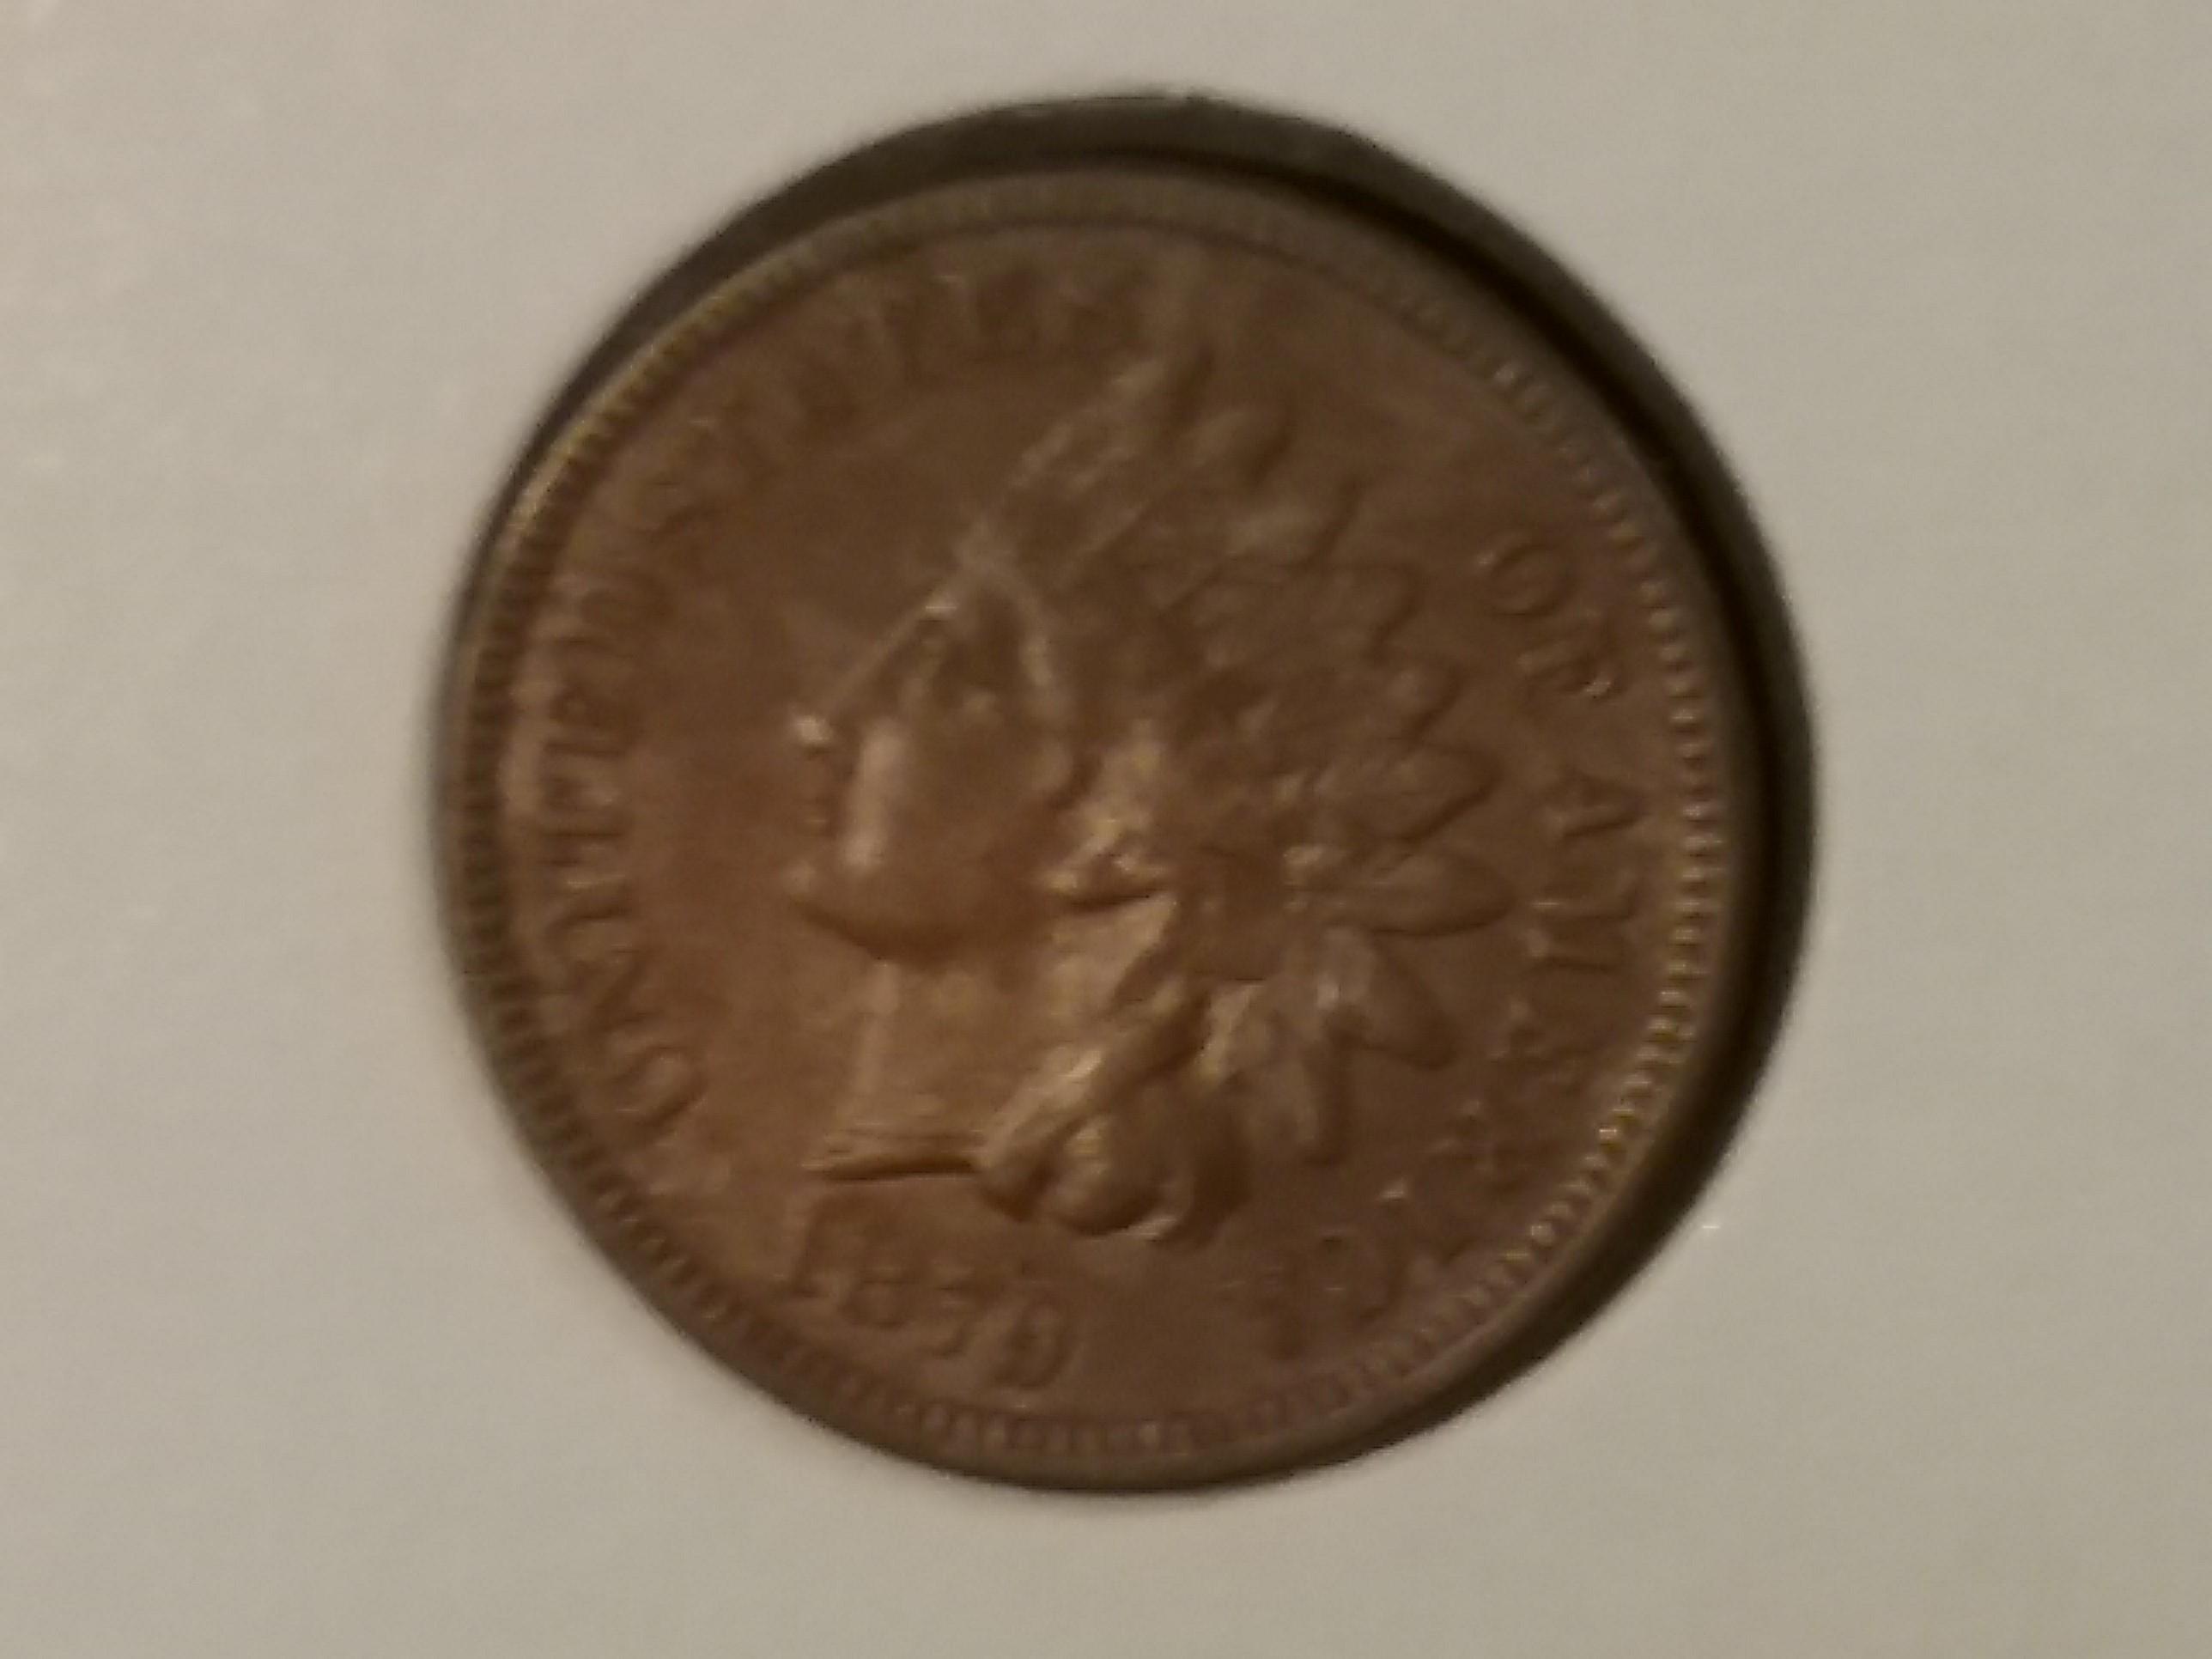 An absolutely gorgeous 1879 Indian Cent in About Uncirculated red-brown condition